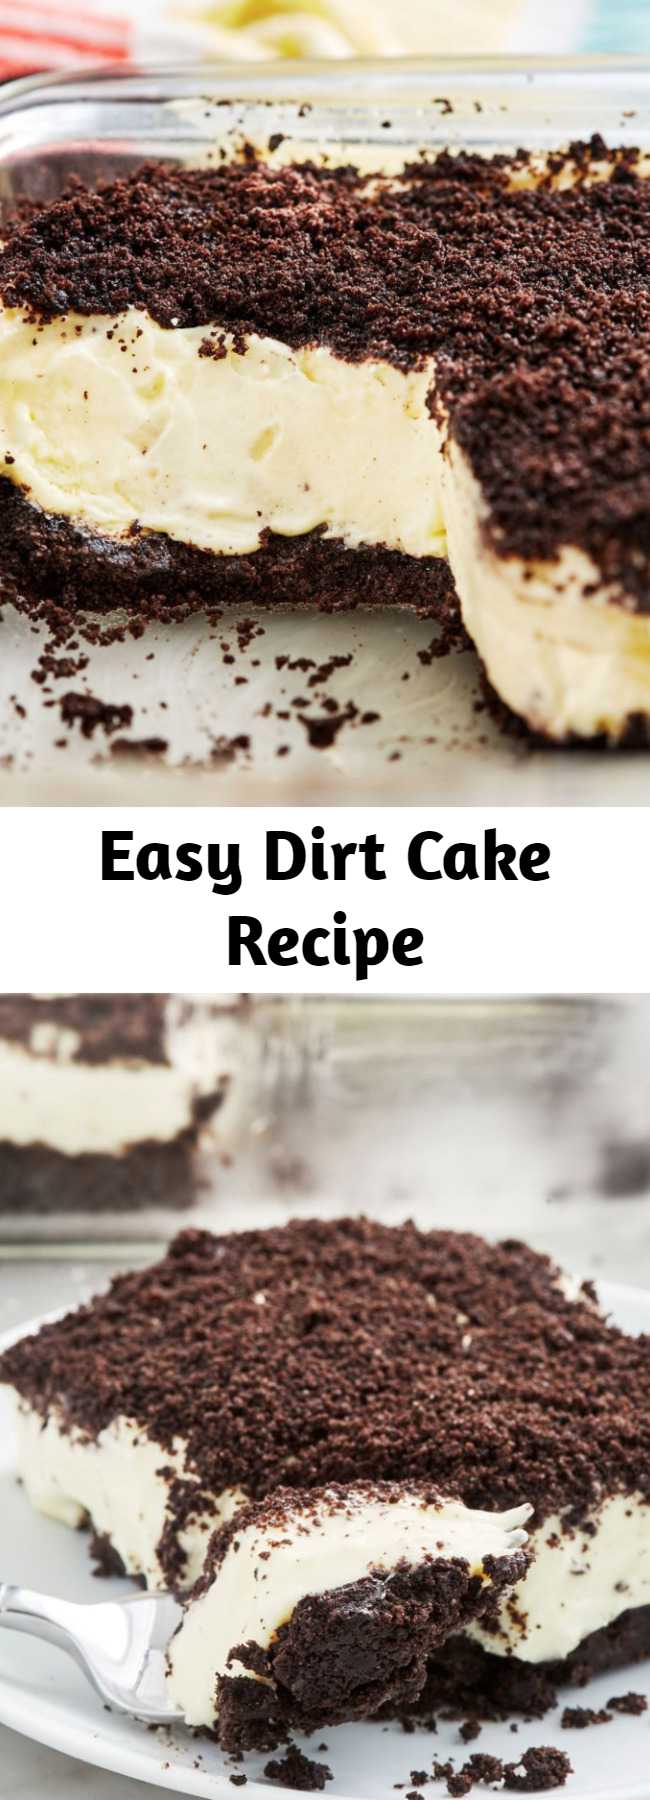 Easy Dirt Cake Recipe - Kids and adults alike will love to dig into this Dirt Cake. Throw some gummy worms on top to make it a little creepier!